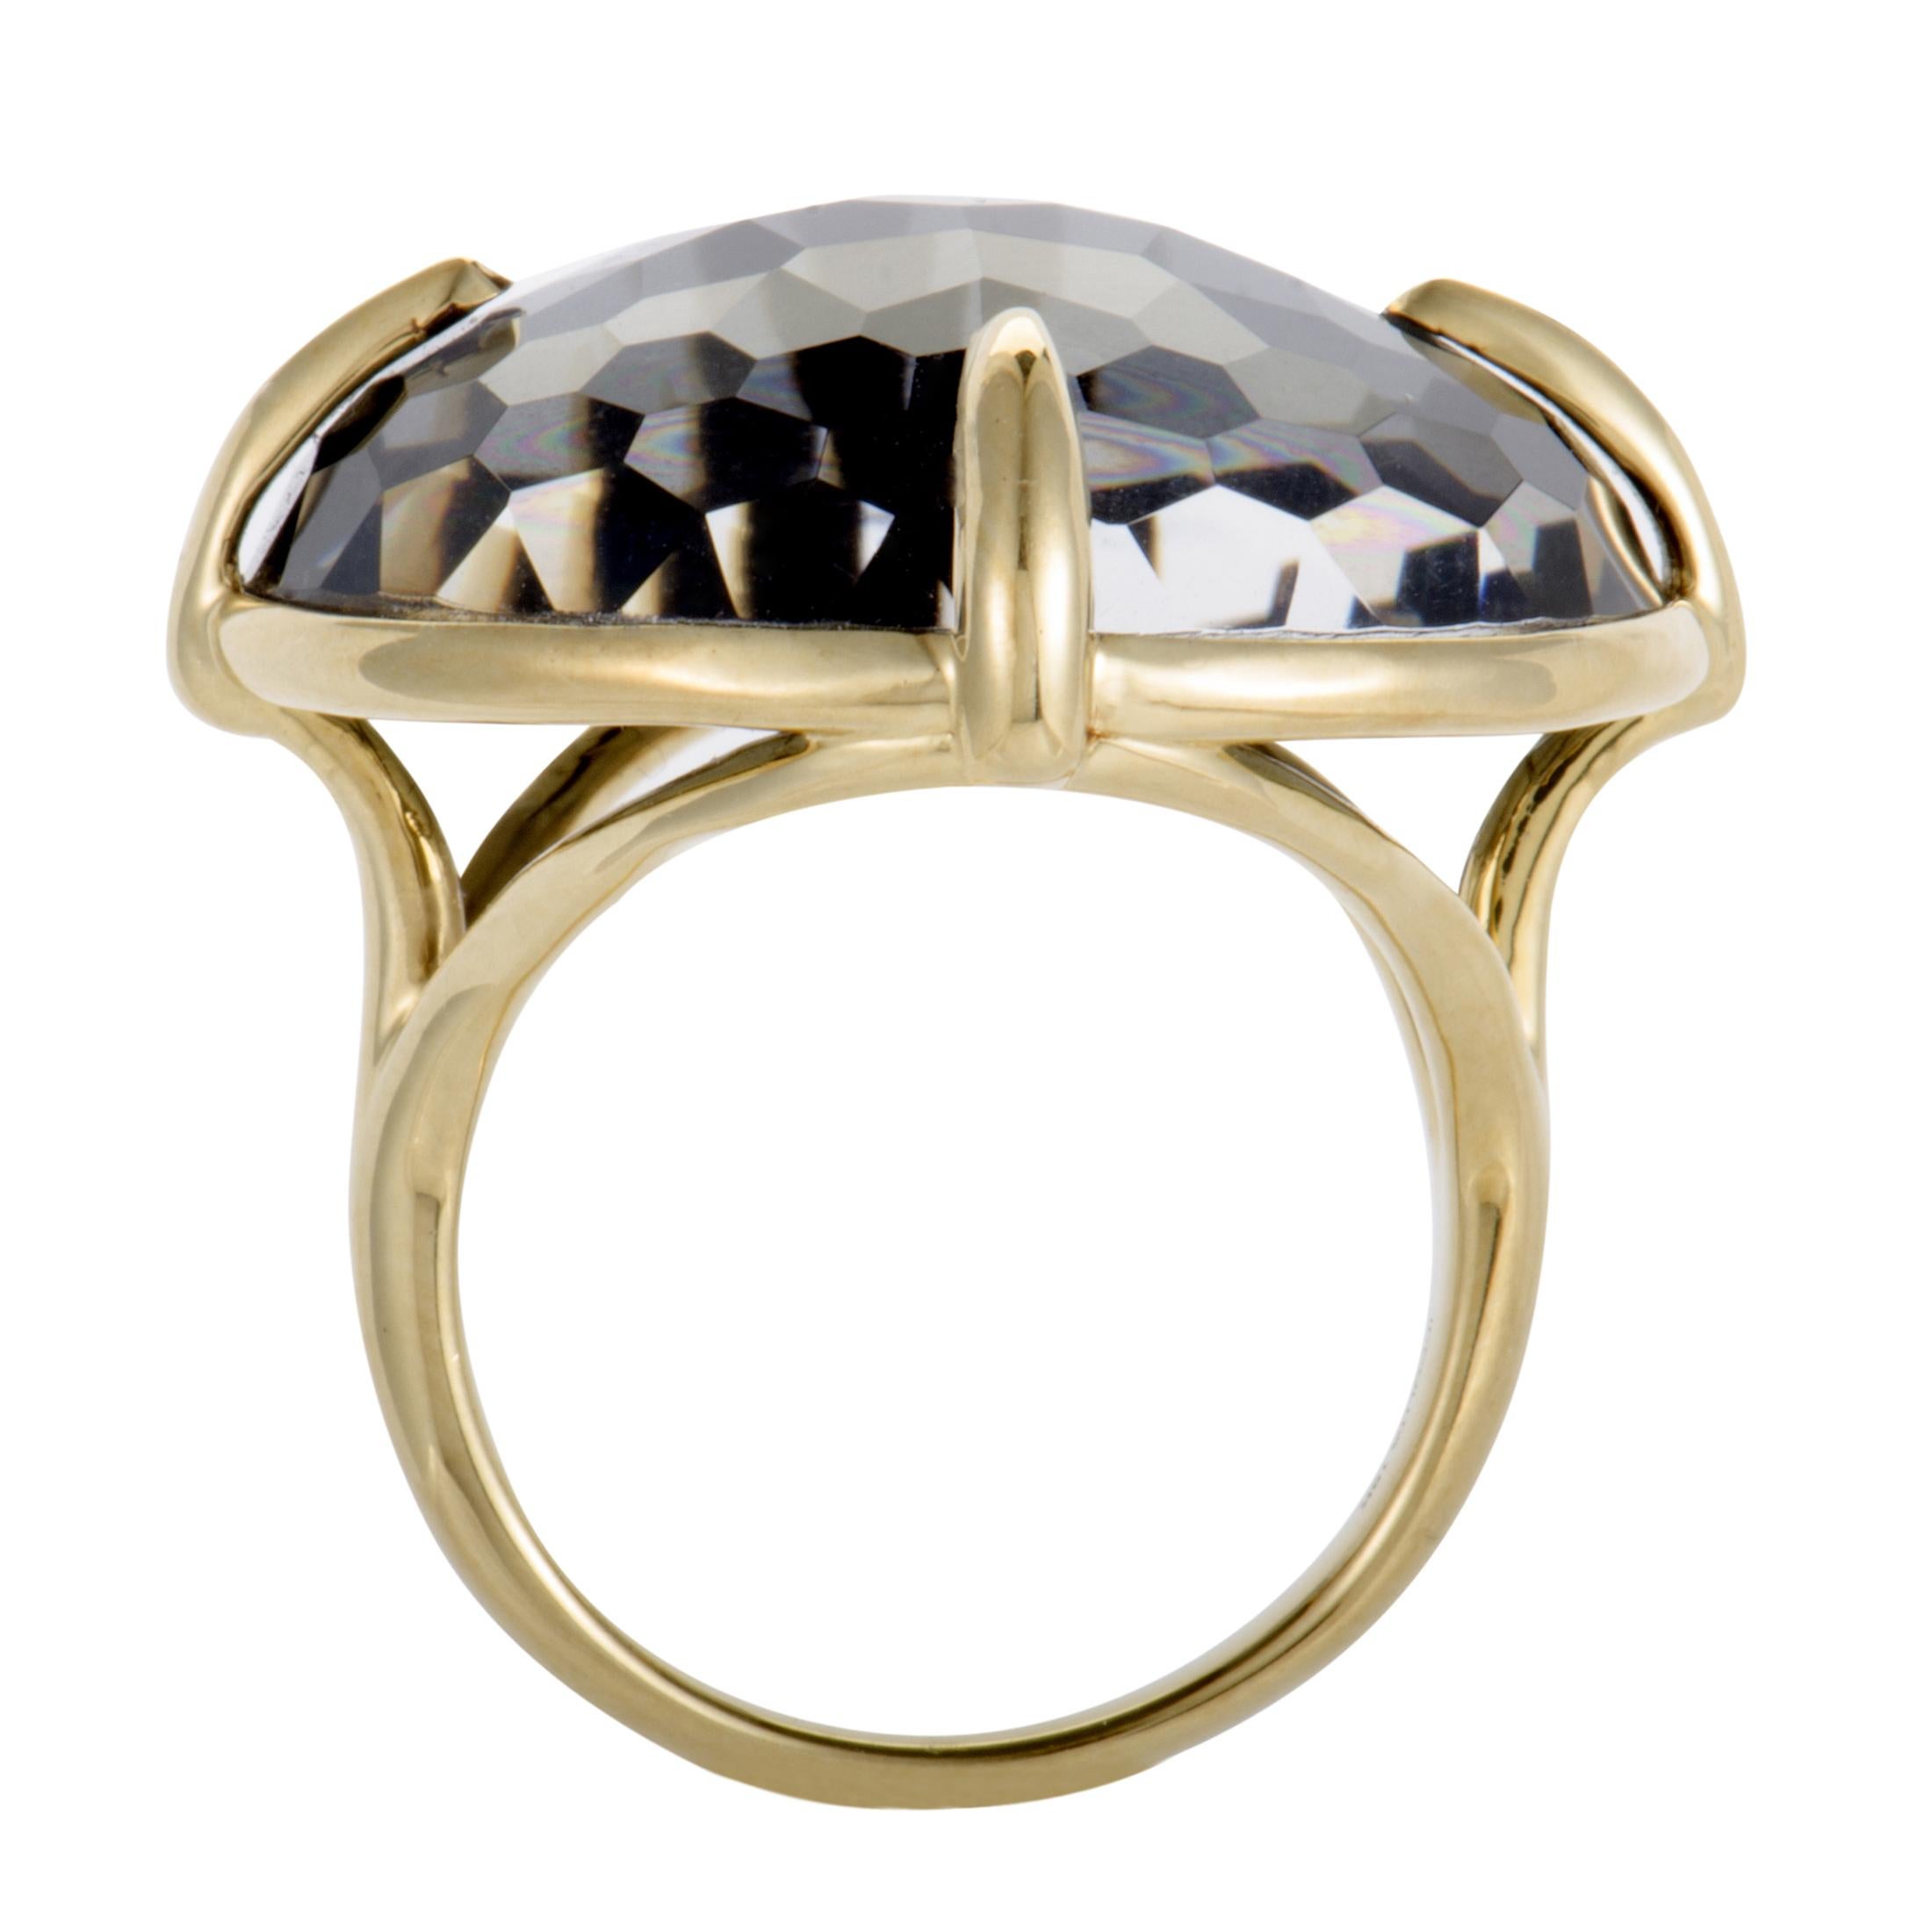 The captivating contrasting effect of warm 18K yellow gold and dark hematite offers prestigious, alluring appeal in this gorgeous Ippolita ring designed for the splendid “Lollipop” collection.
Ring Top Dimensions: 26mm x 26mm